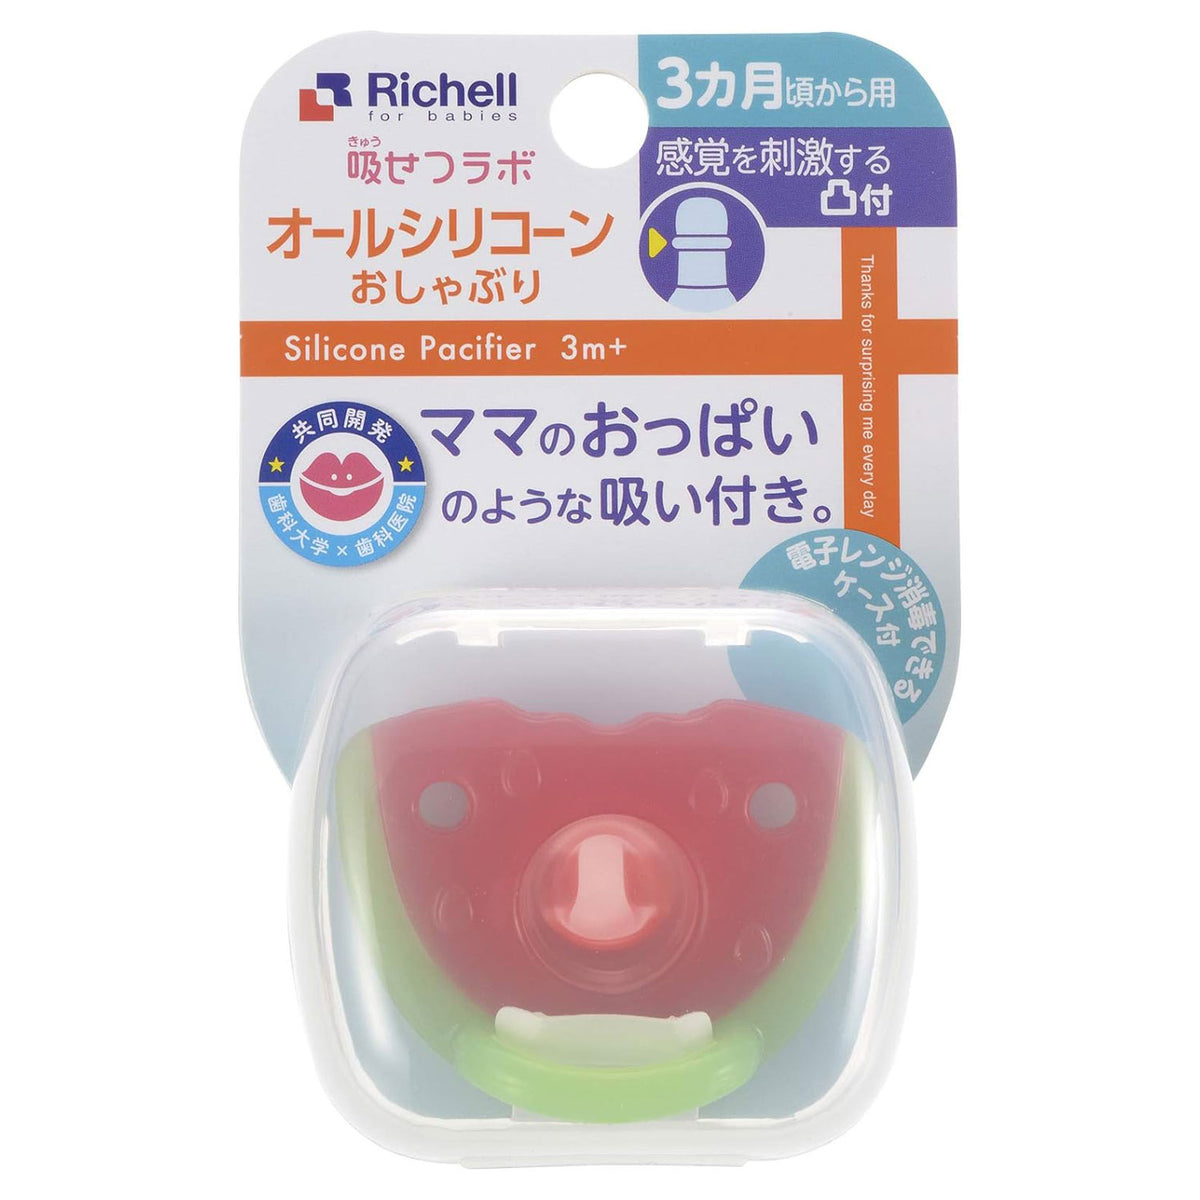 Richell Suction Lab All Silicone Pacifier Watermelon with Case 3m+